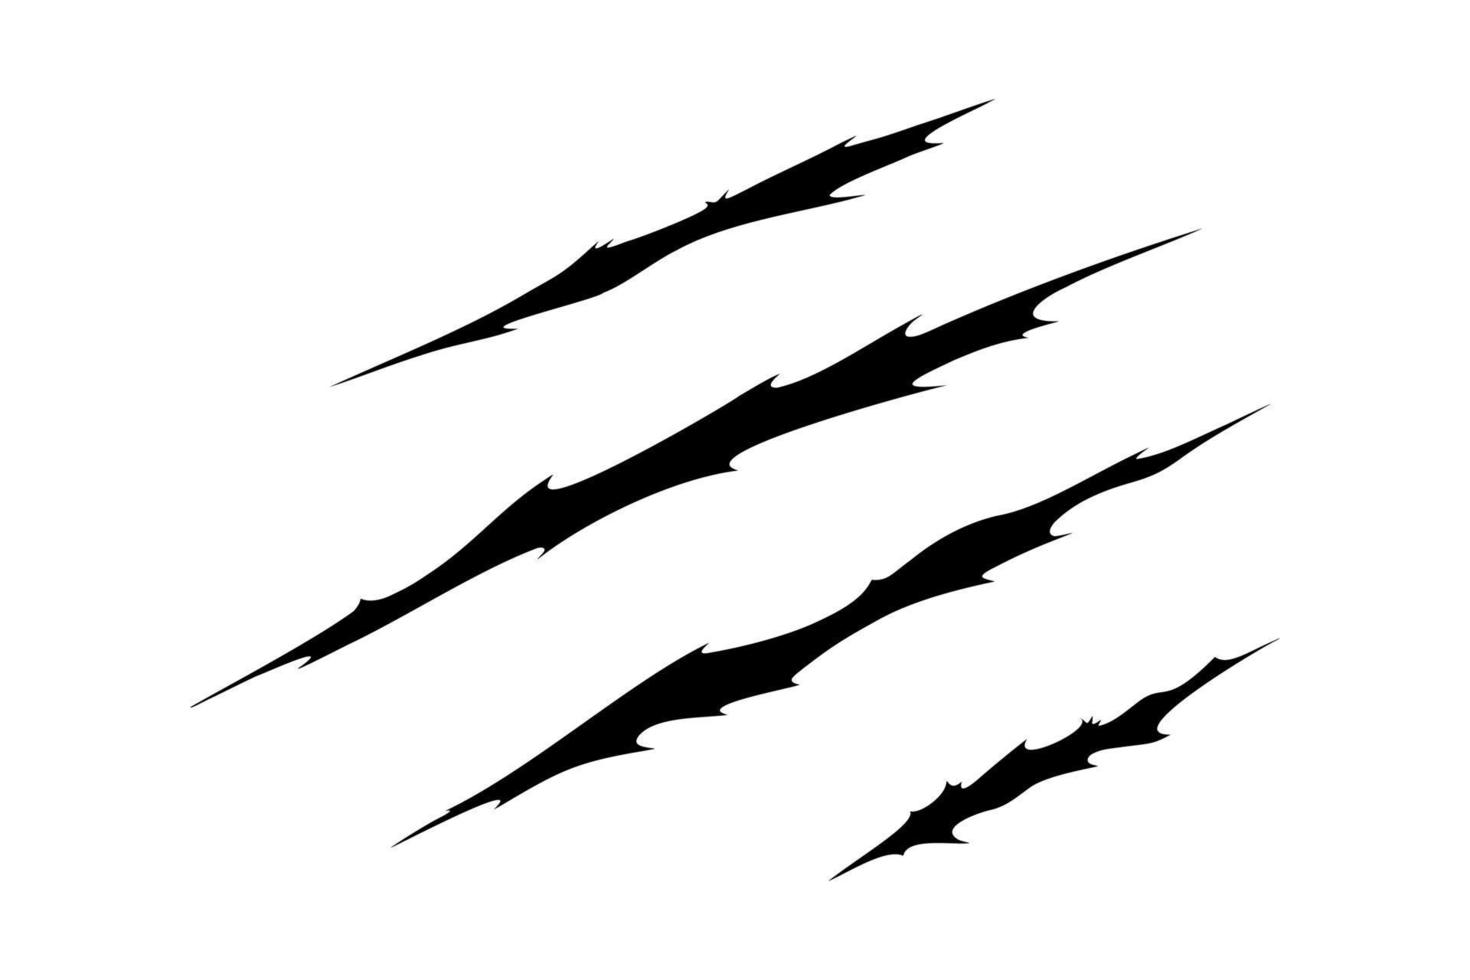 Claw scratches of wild animal. Cat scratches marks isolated in white background. Vector illustration